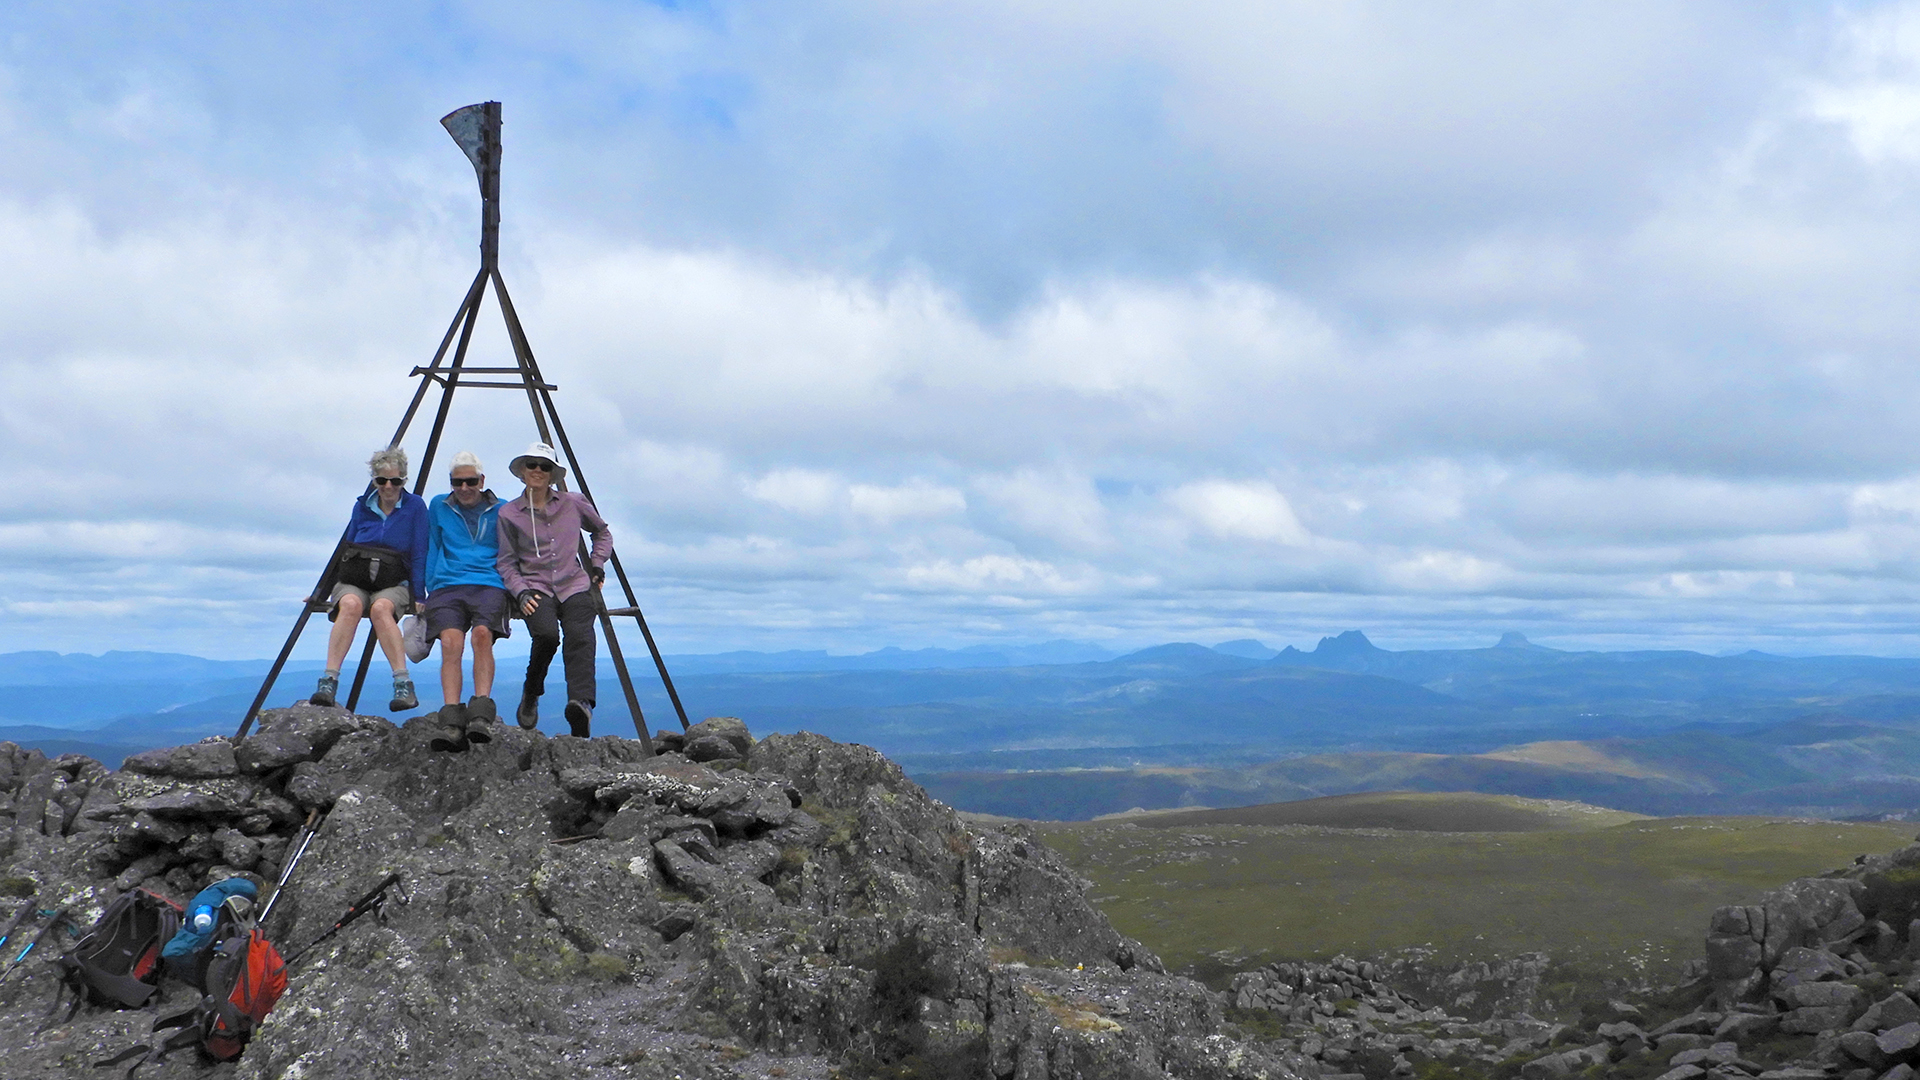 Gill, John and Karen on top of Black Bluff with Cradle Mountain in the distance